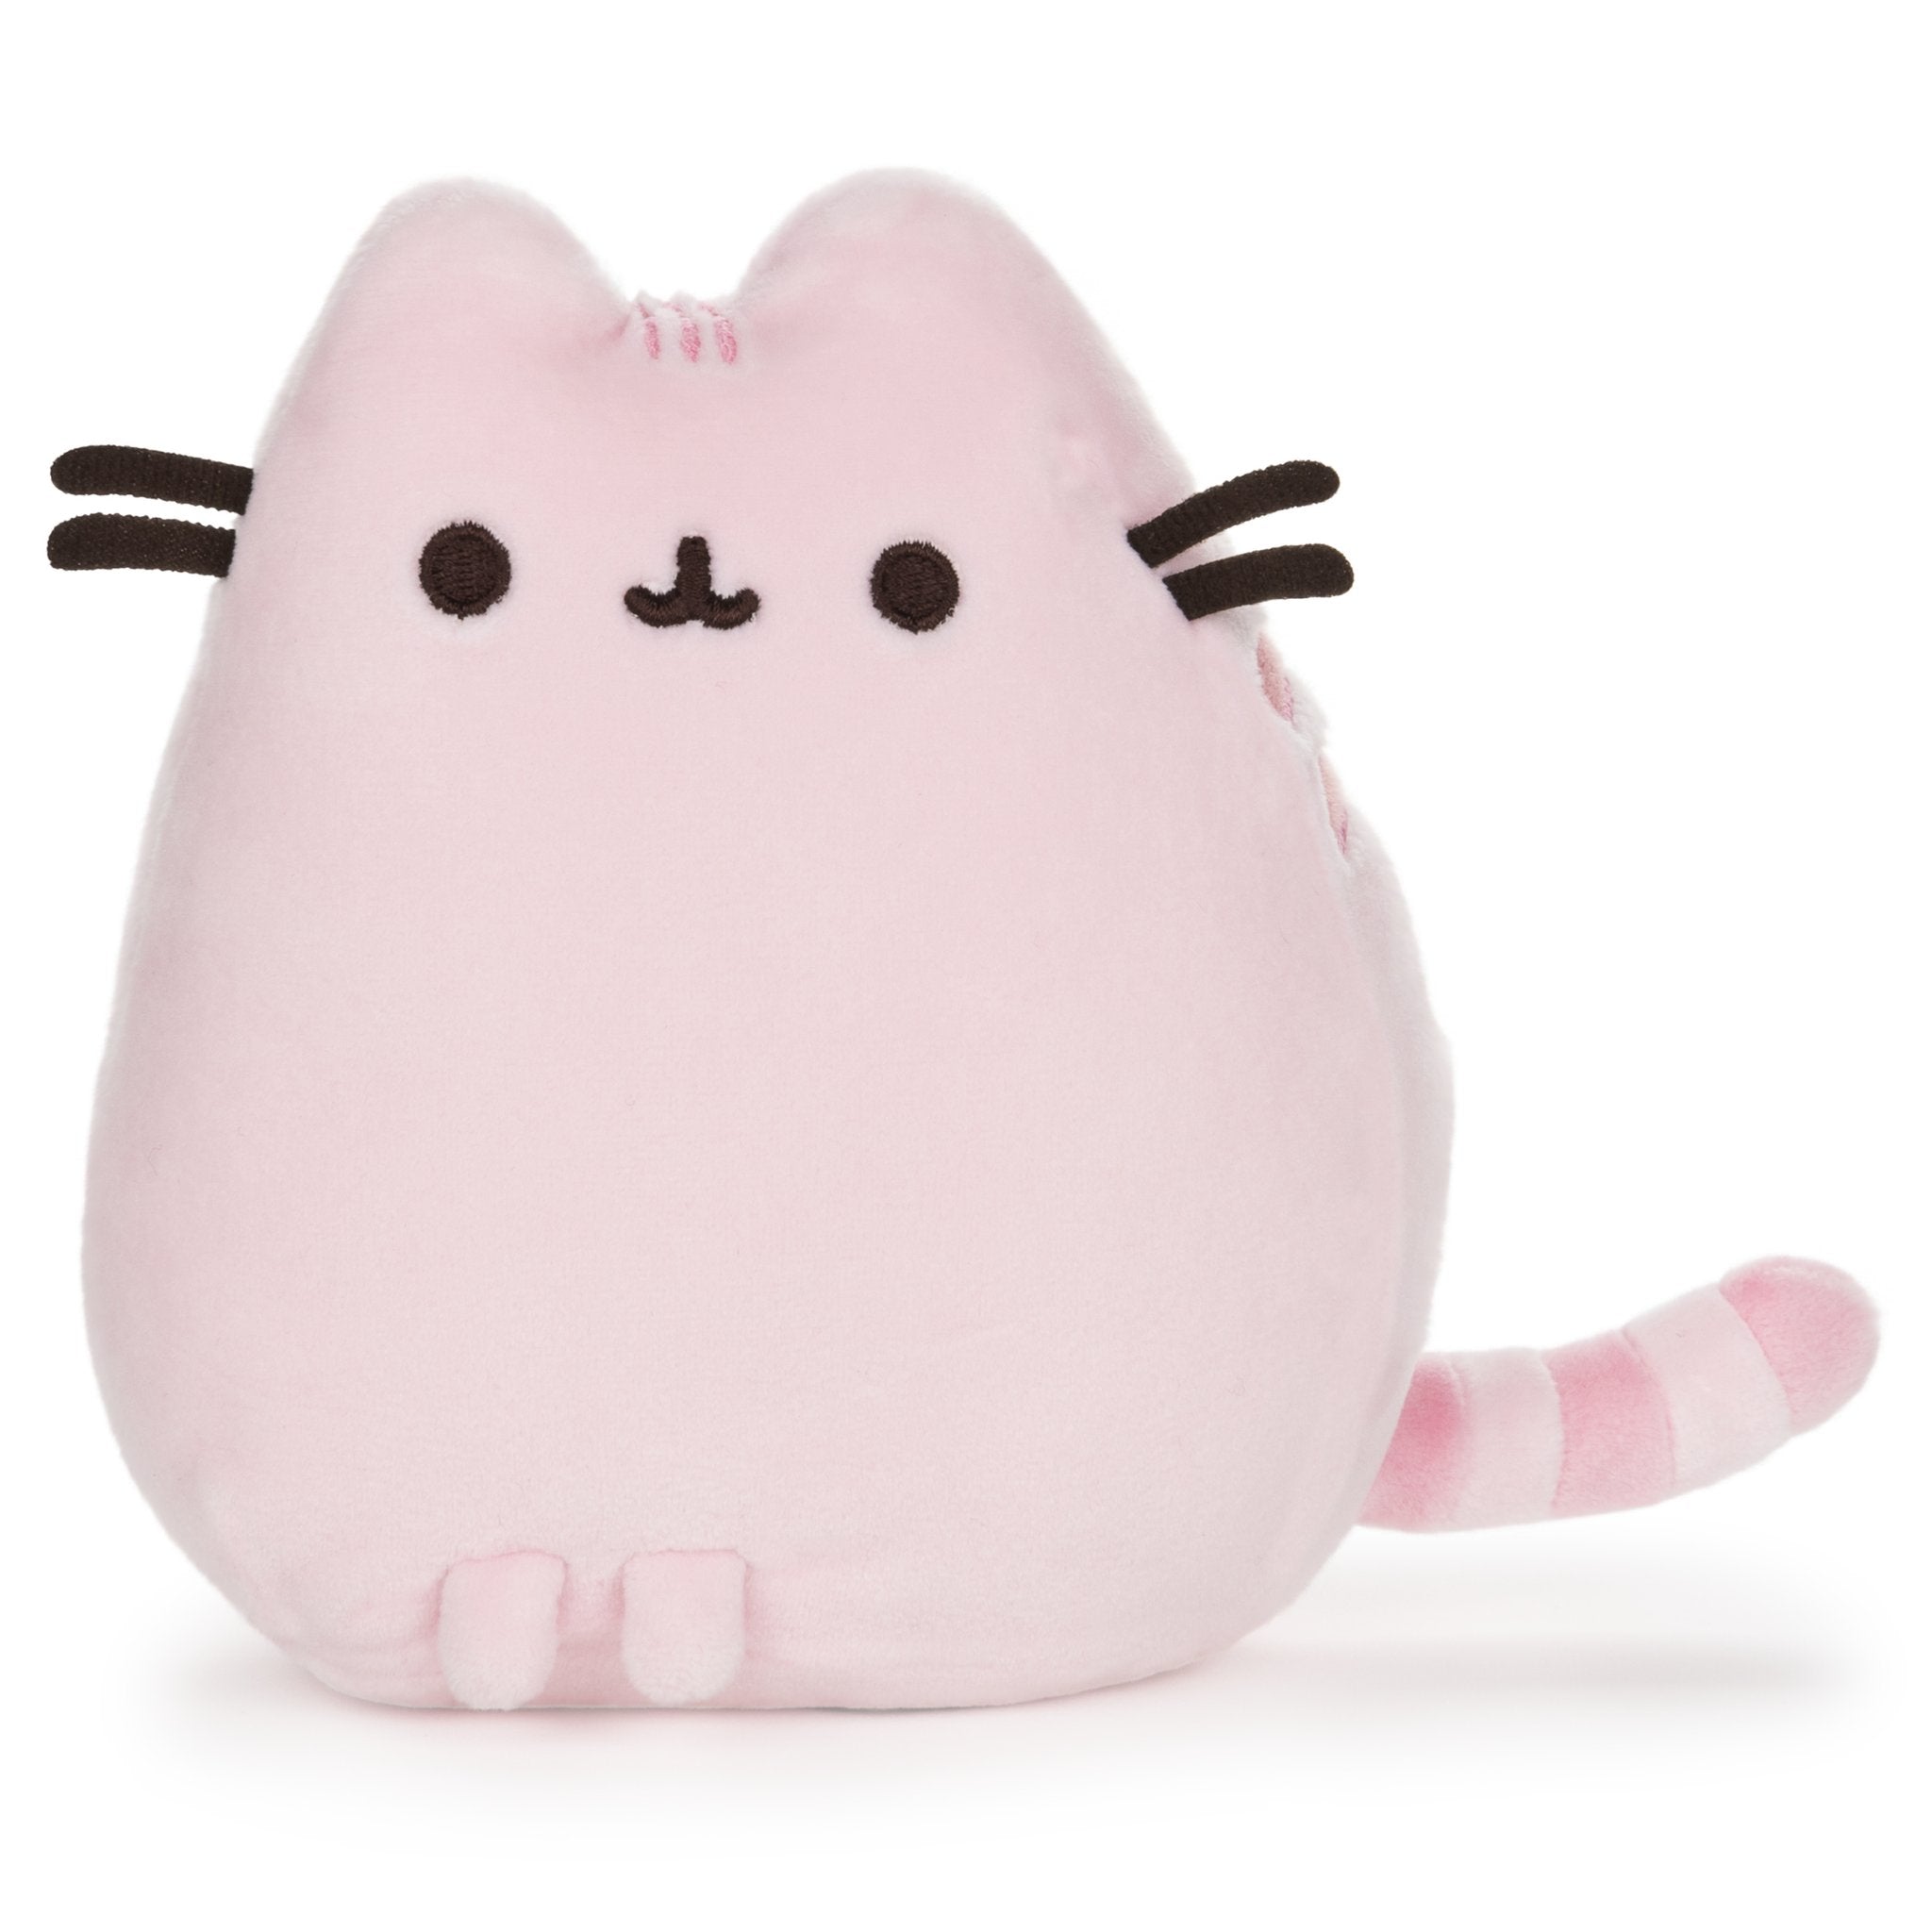 Pusheen by the Numbers: A Little Painting Kit